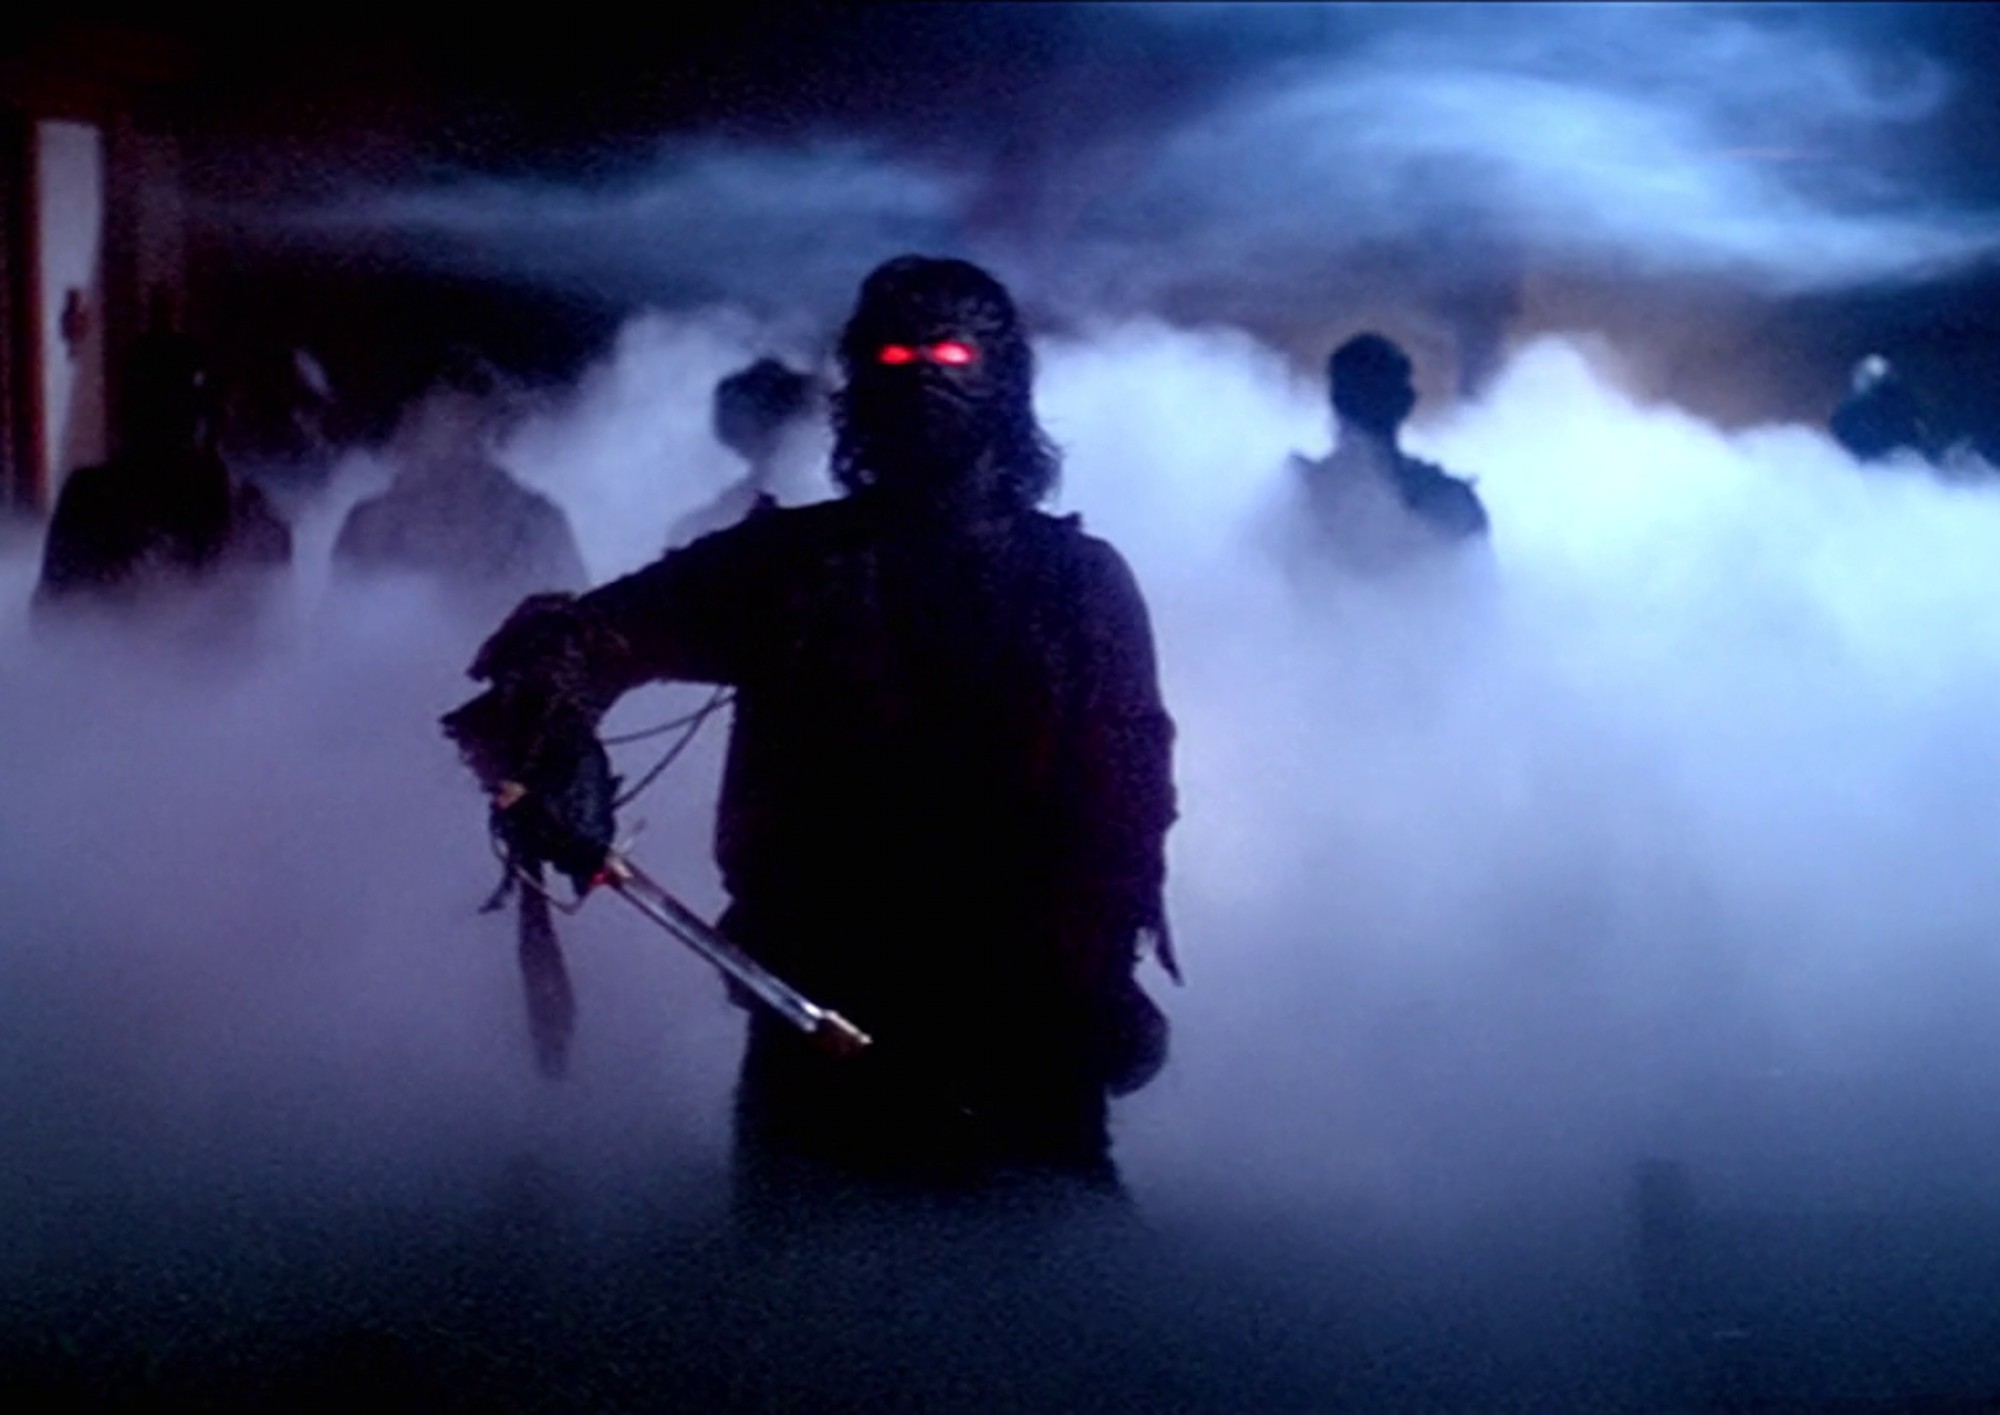 Image from the motion picture The Fog